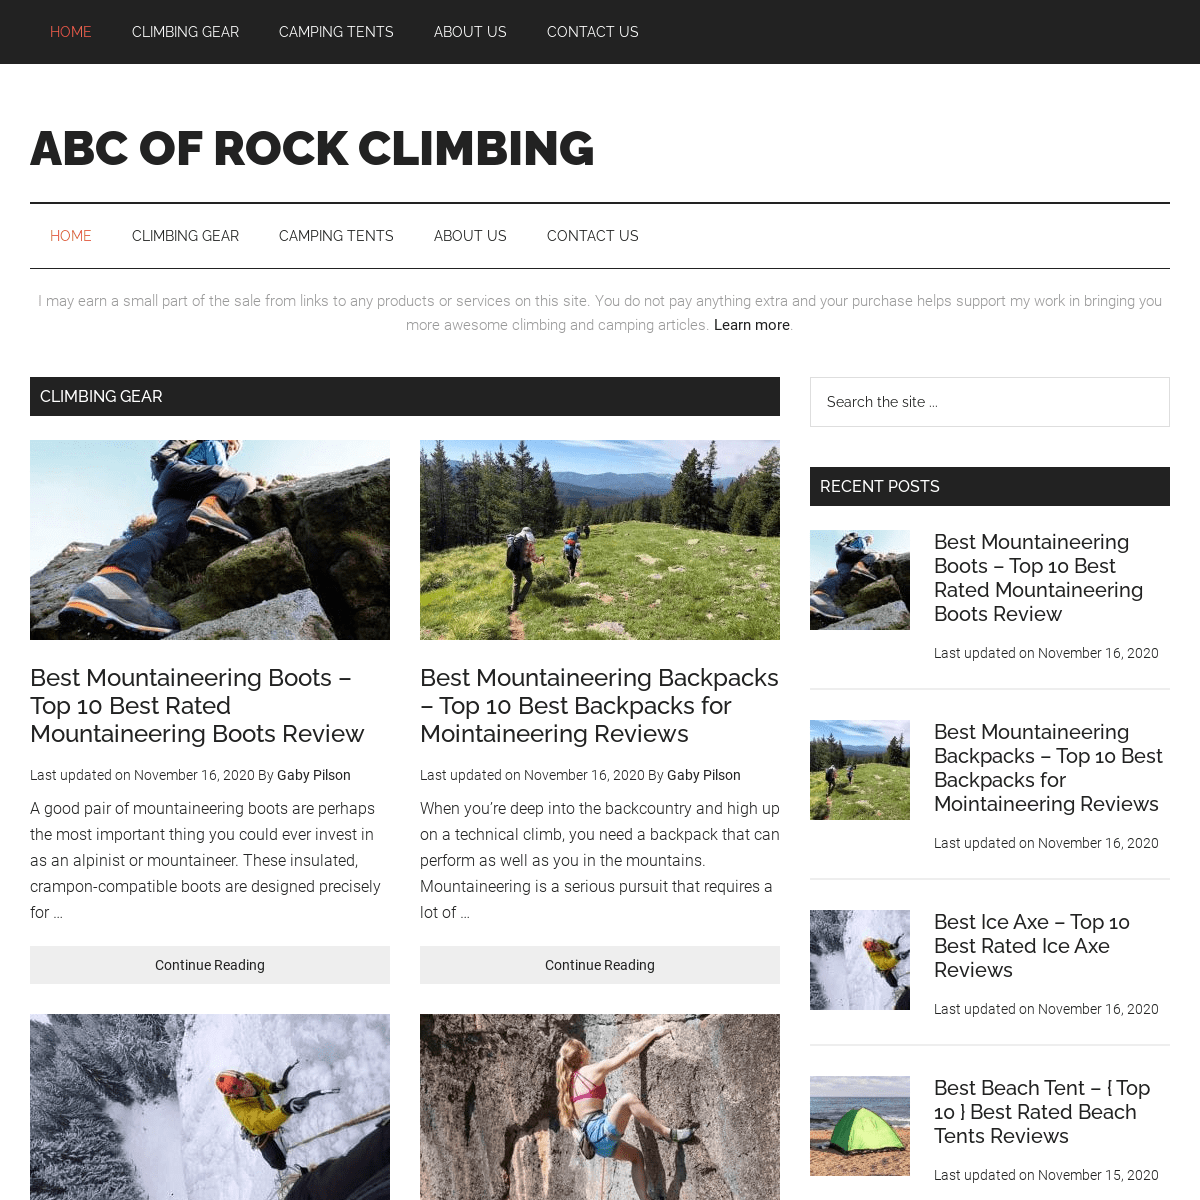 A complete backup of https://abc-of-rockclimbing.com